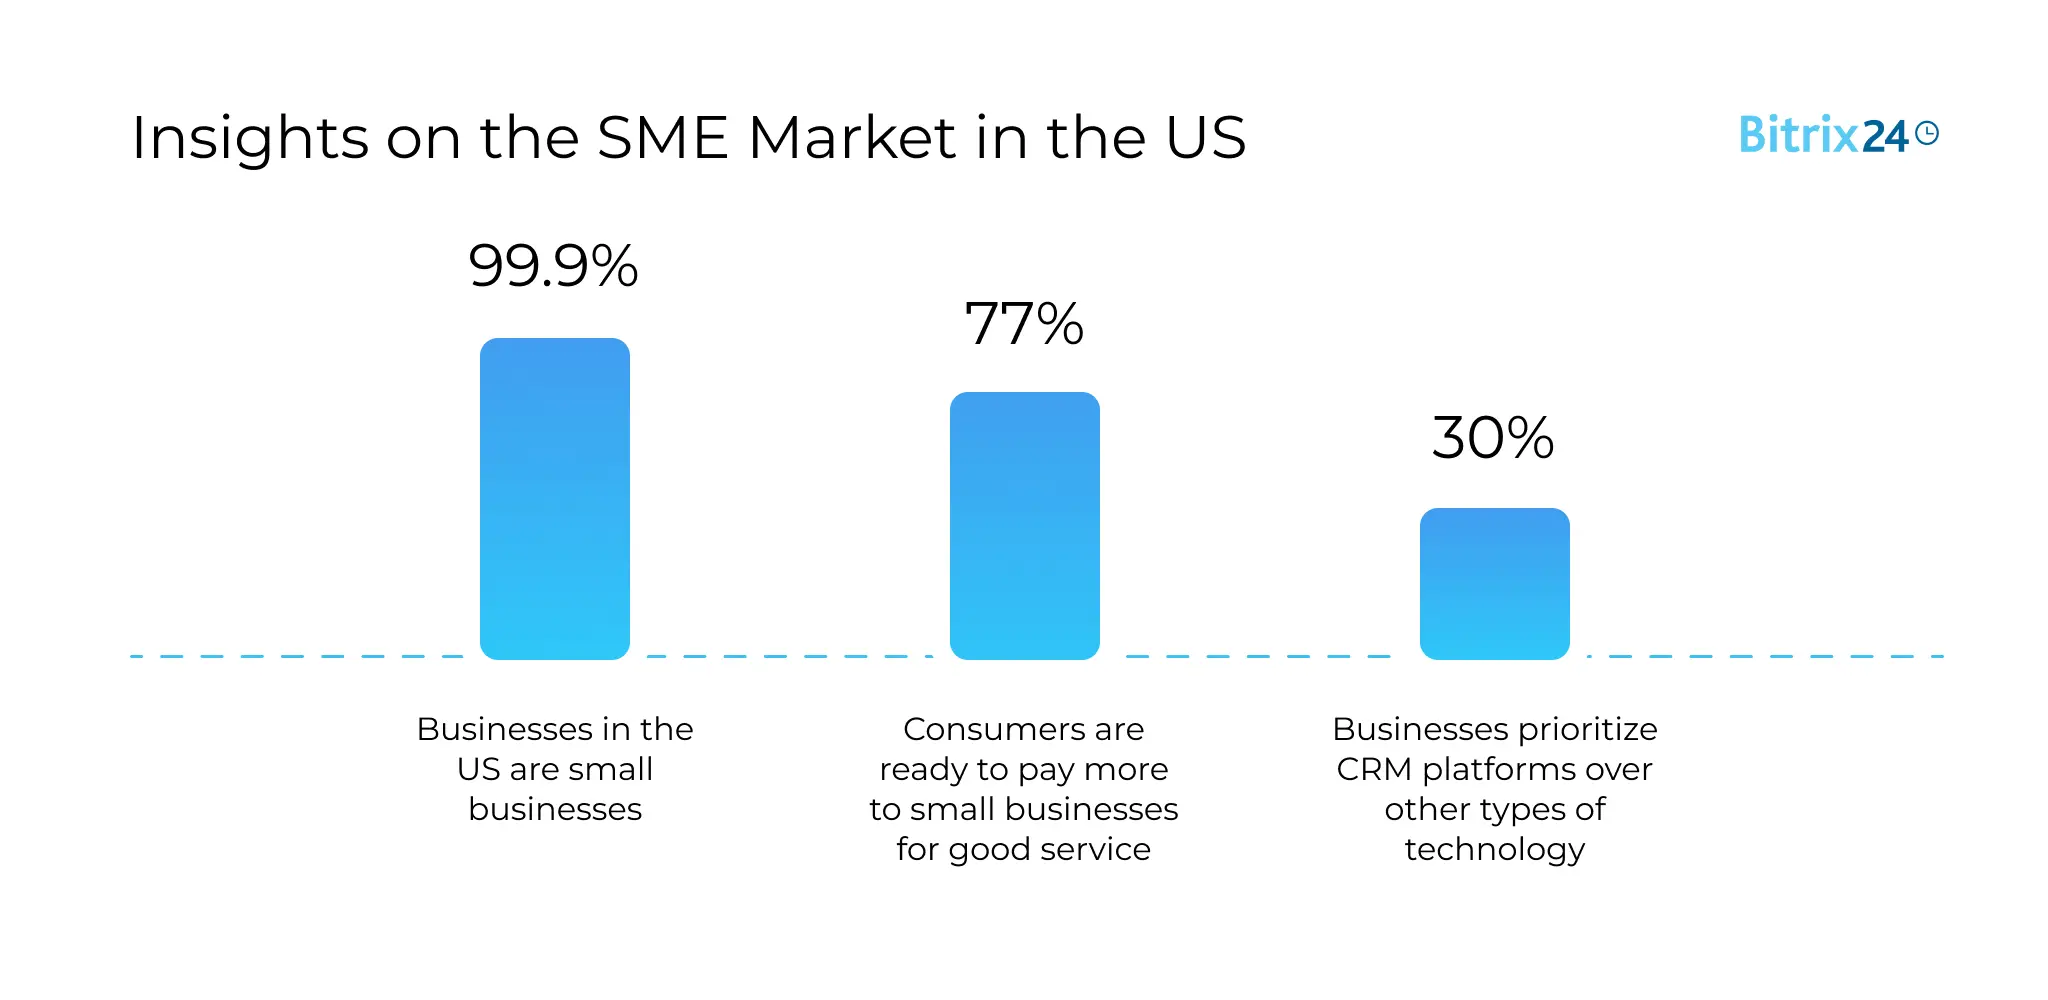 Insights on the SME Market in the US